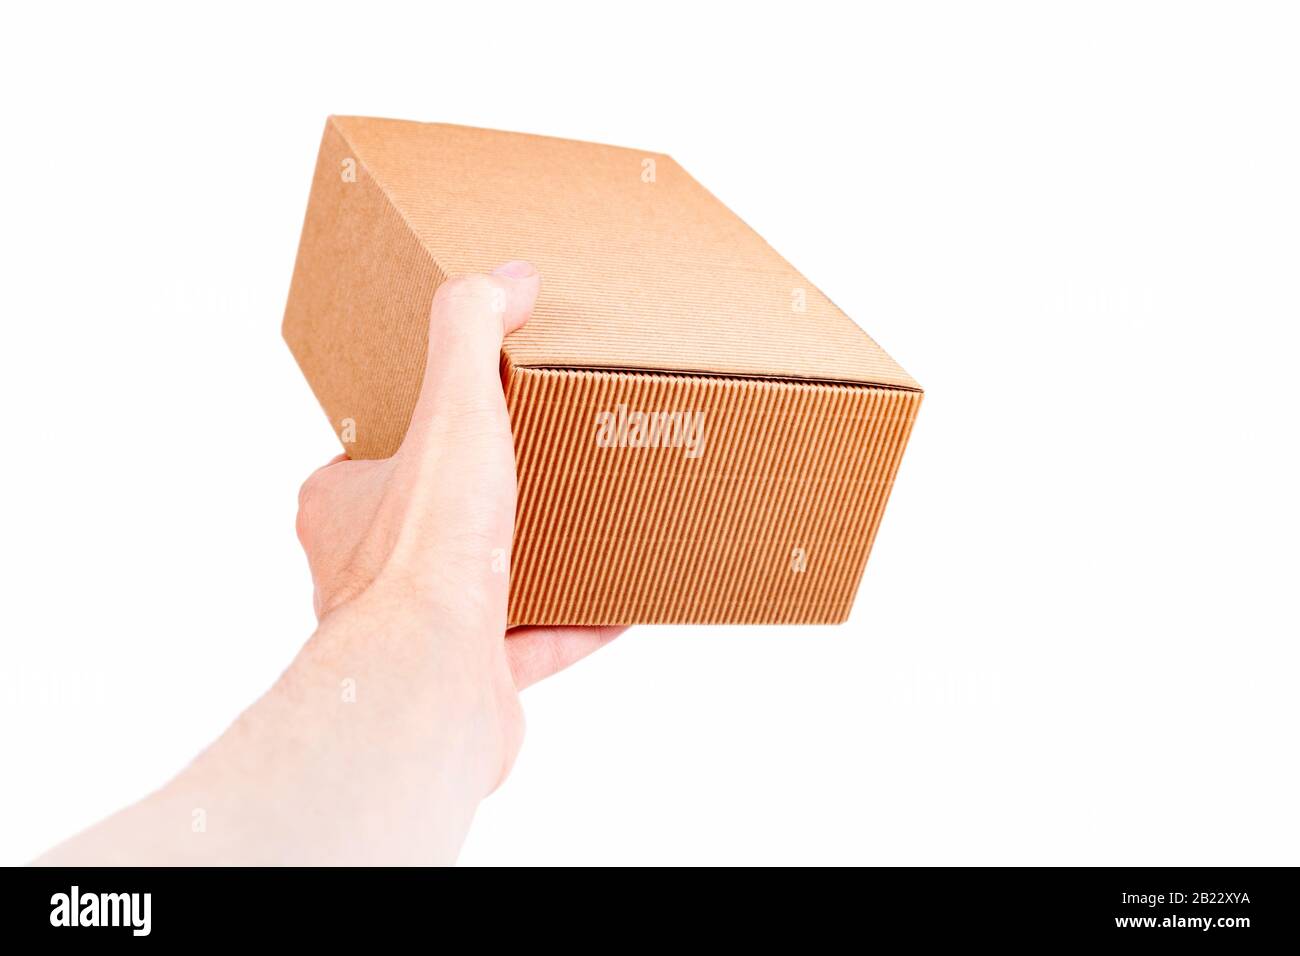 https://c8.alamy.com/comp/2B22XYA/man-handing-a-small-brown-closed-cardboard-package-quick-shipment-delivery-transportation-and-product-shipping-concept-first-person-view-carton-box-2B22XYA.jpg